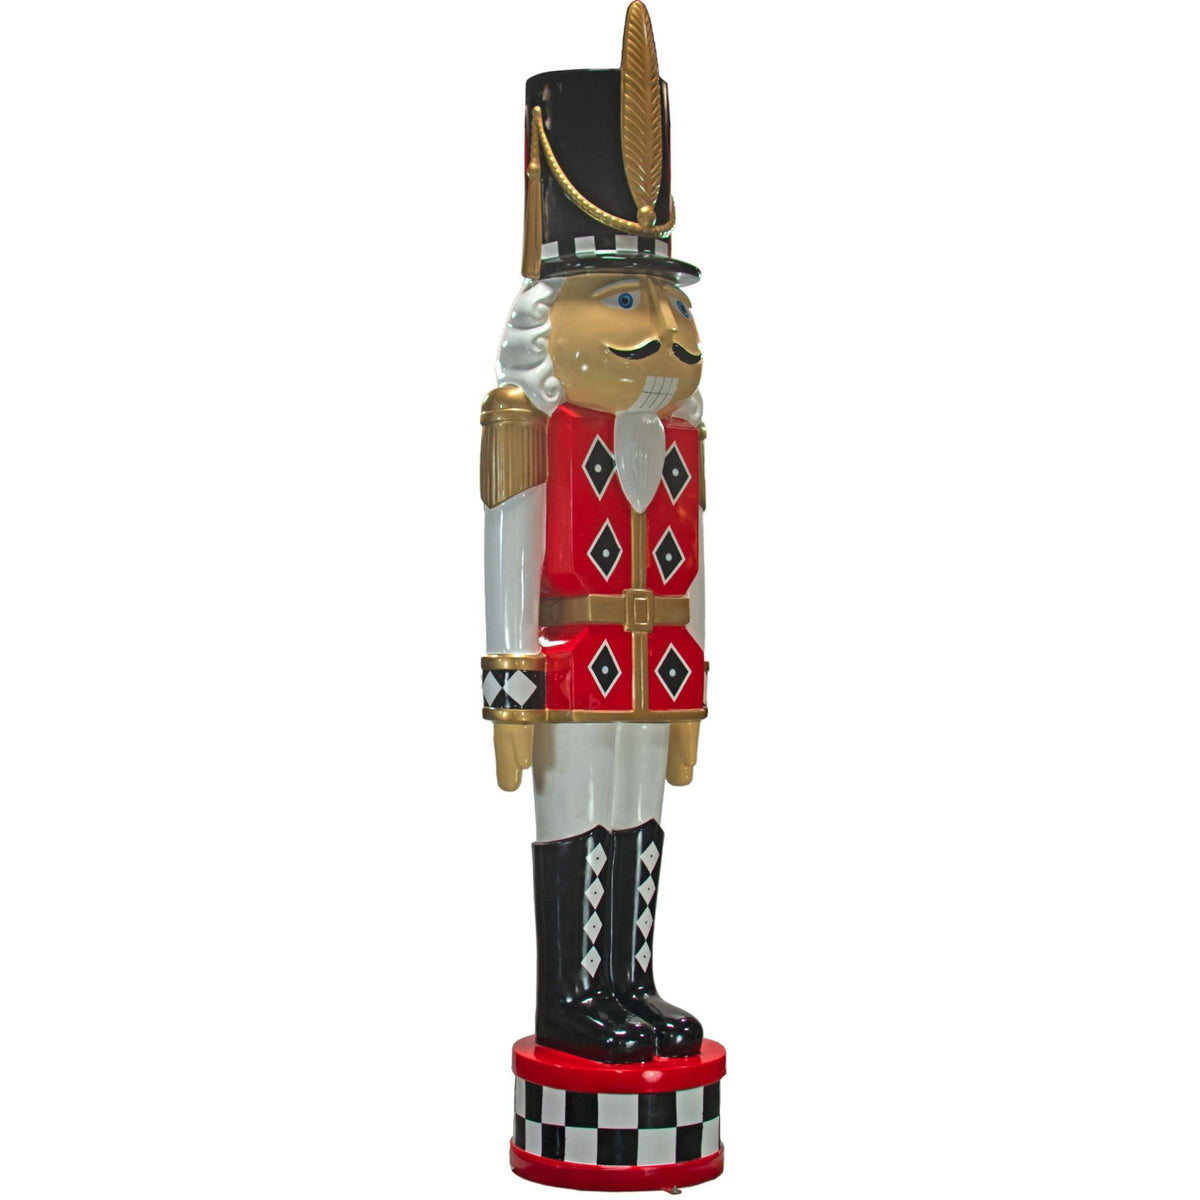 Lee Display's Brand New 12FT Red, Black and White Checkered Fiberglass Nutcrackers on Sale and Available for Local Installation at leedisplay.com